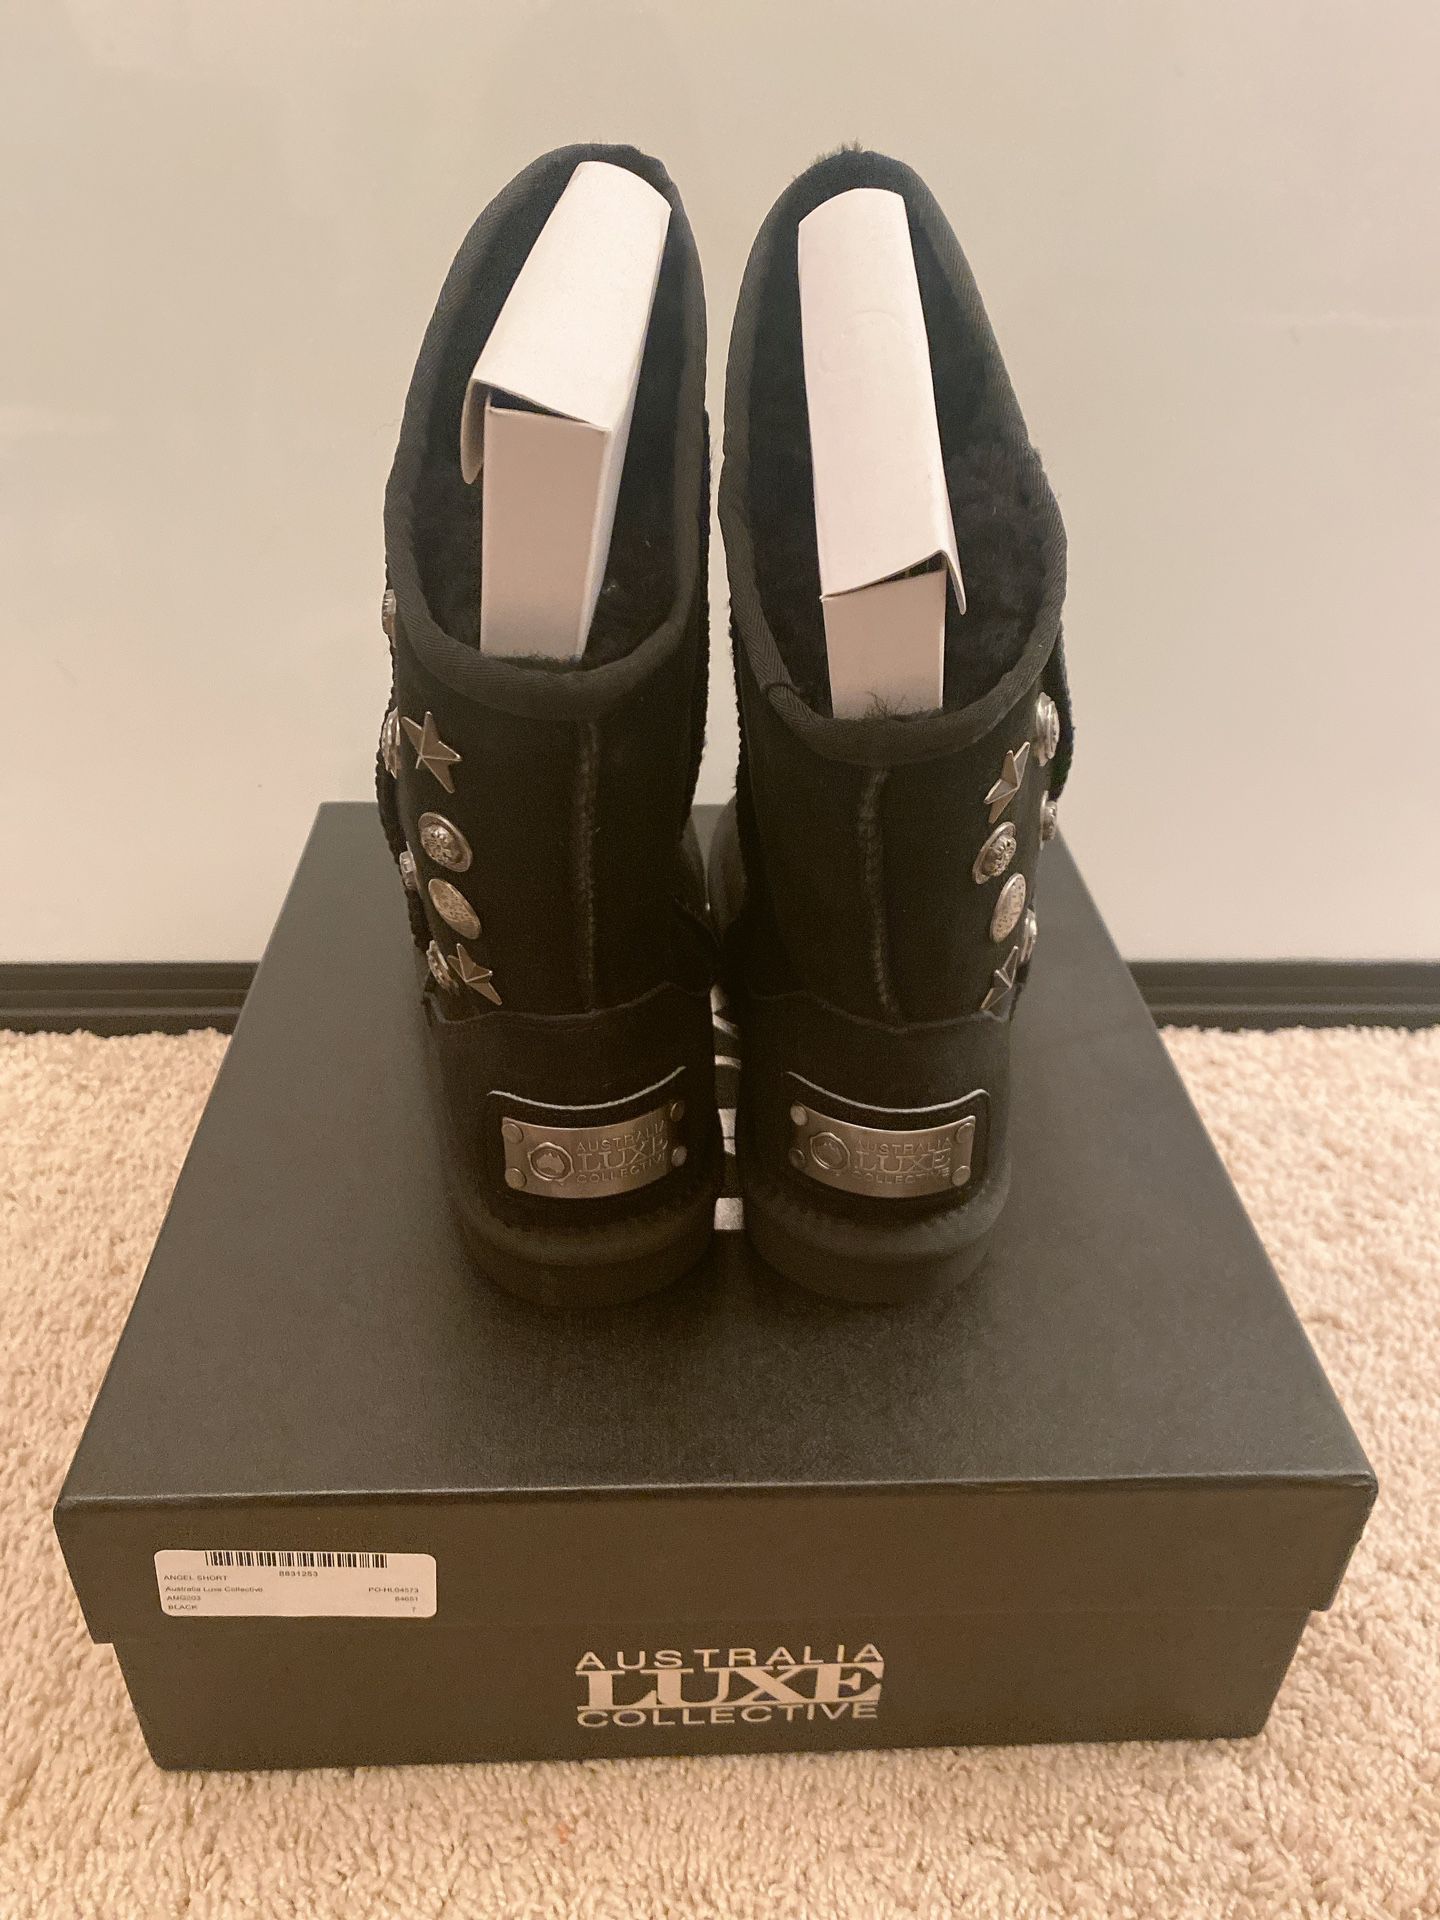 Australia Luxe Collective Boots for Sale in Brea, CA - OfferUp